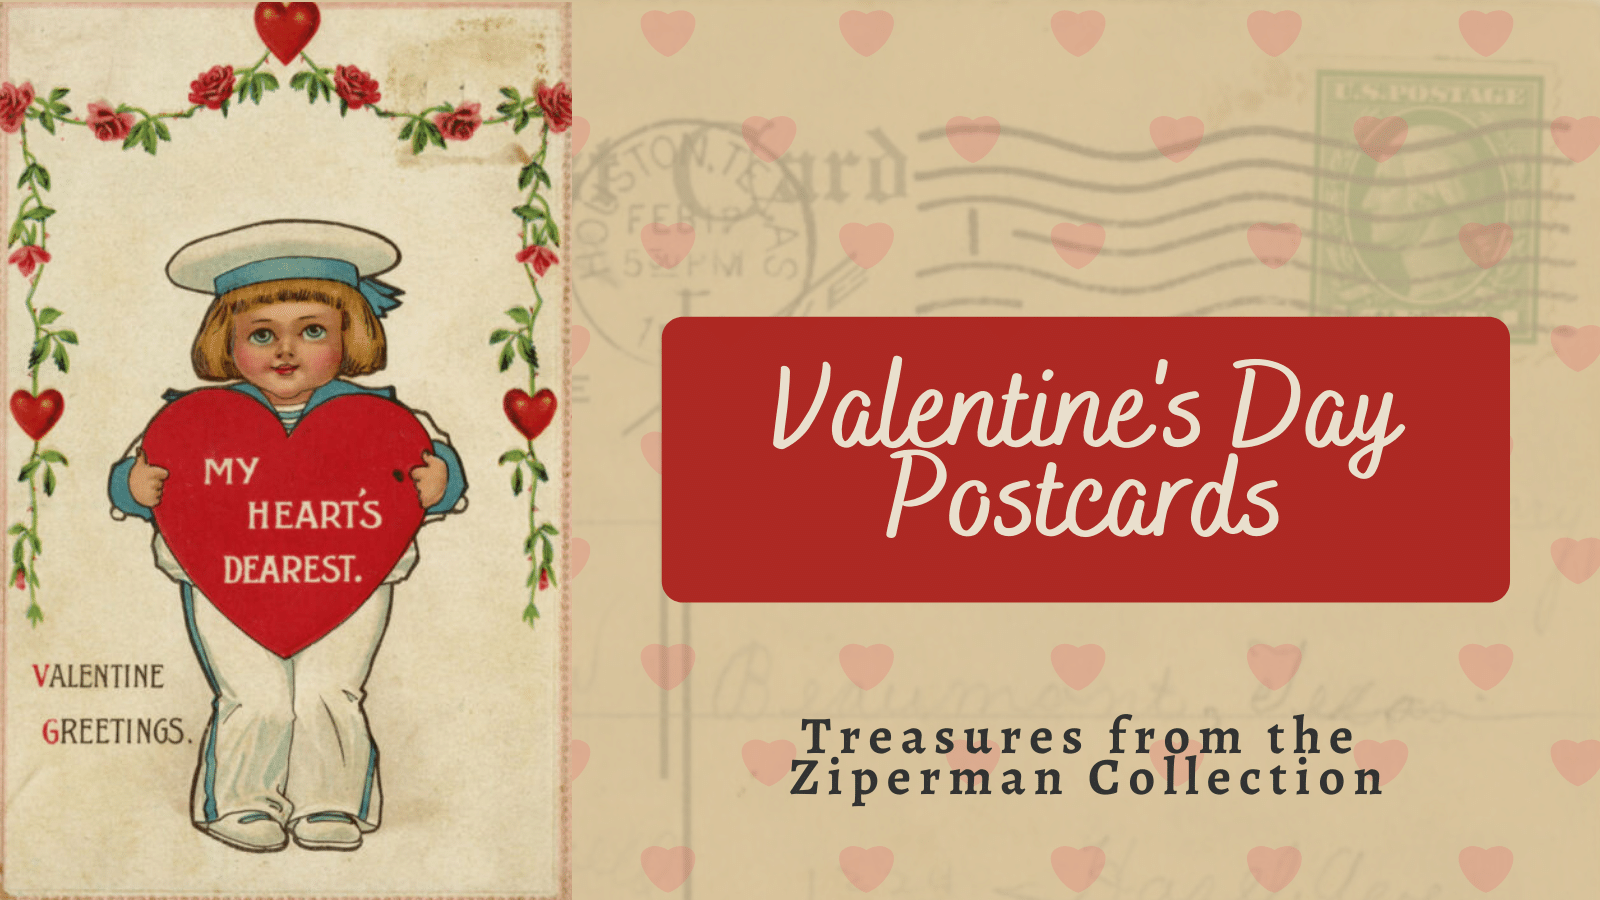 Vintage Valentine's cards are popular with collectors